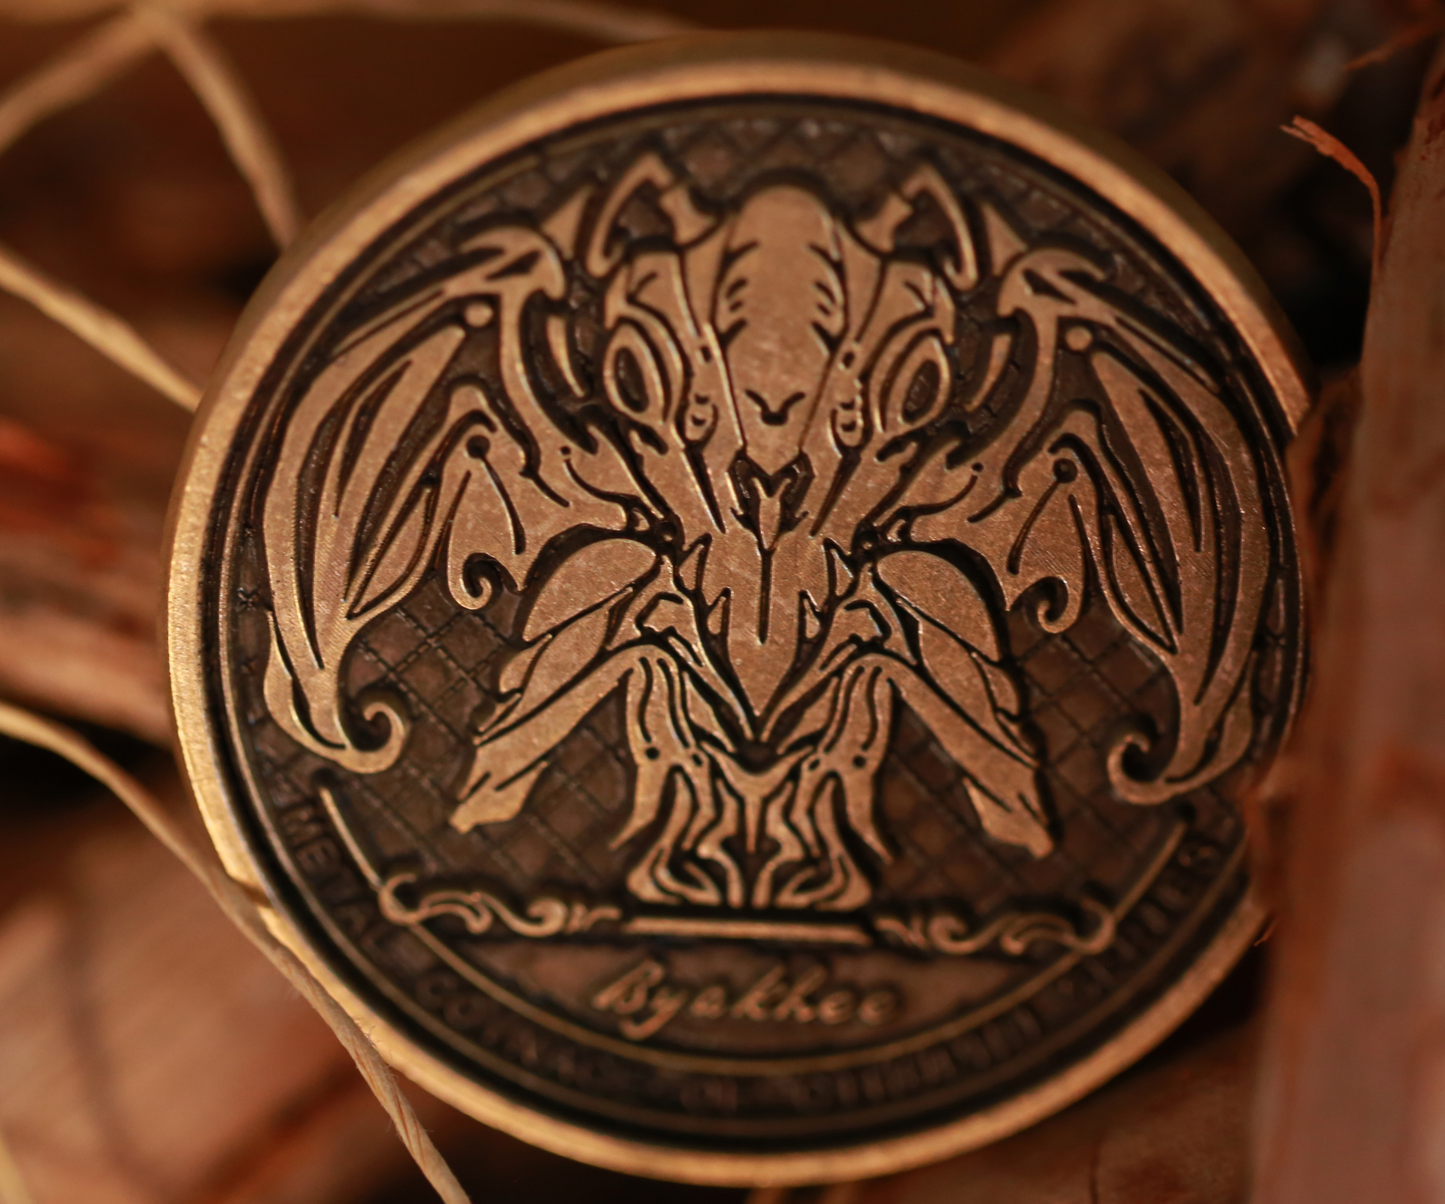 The Myth of Cthulhu Collectible Metal Coins